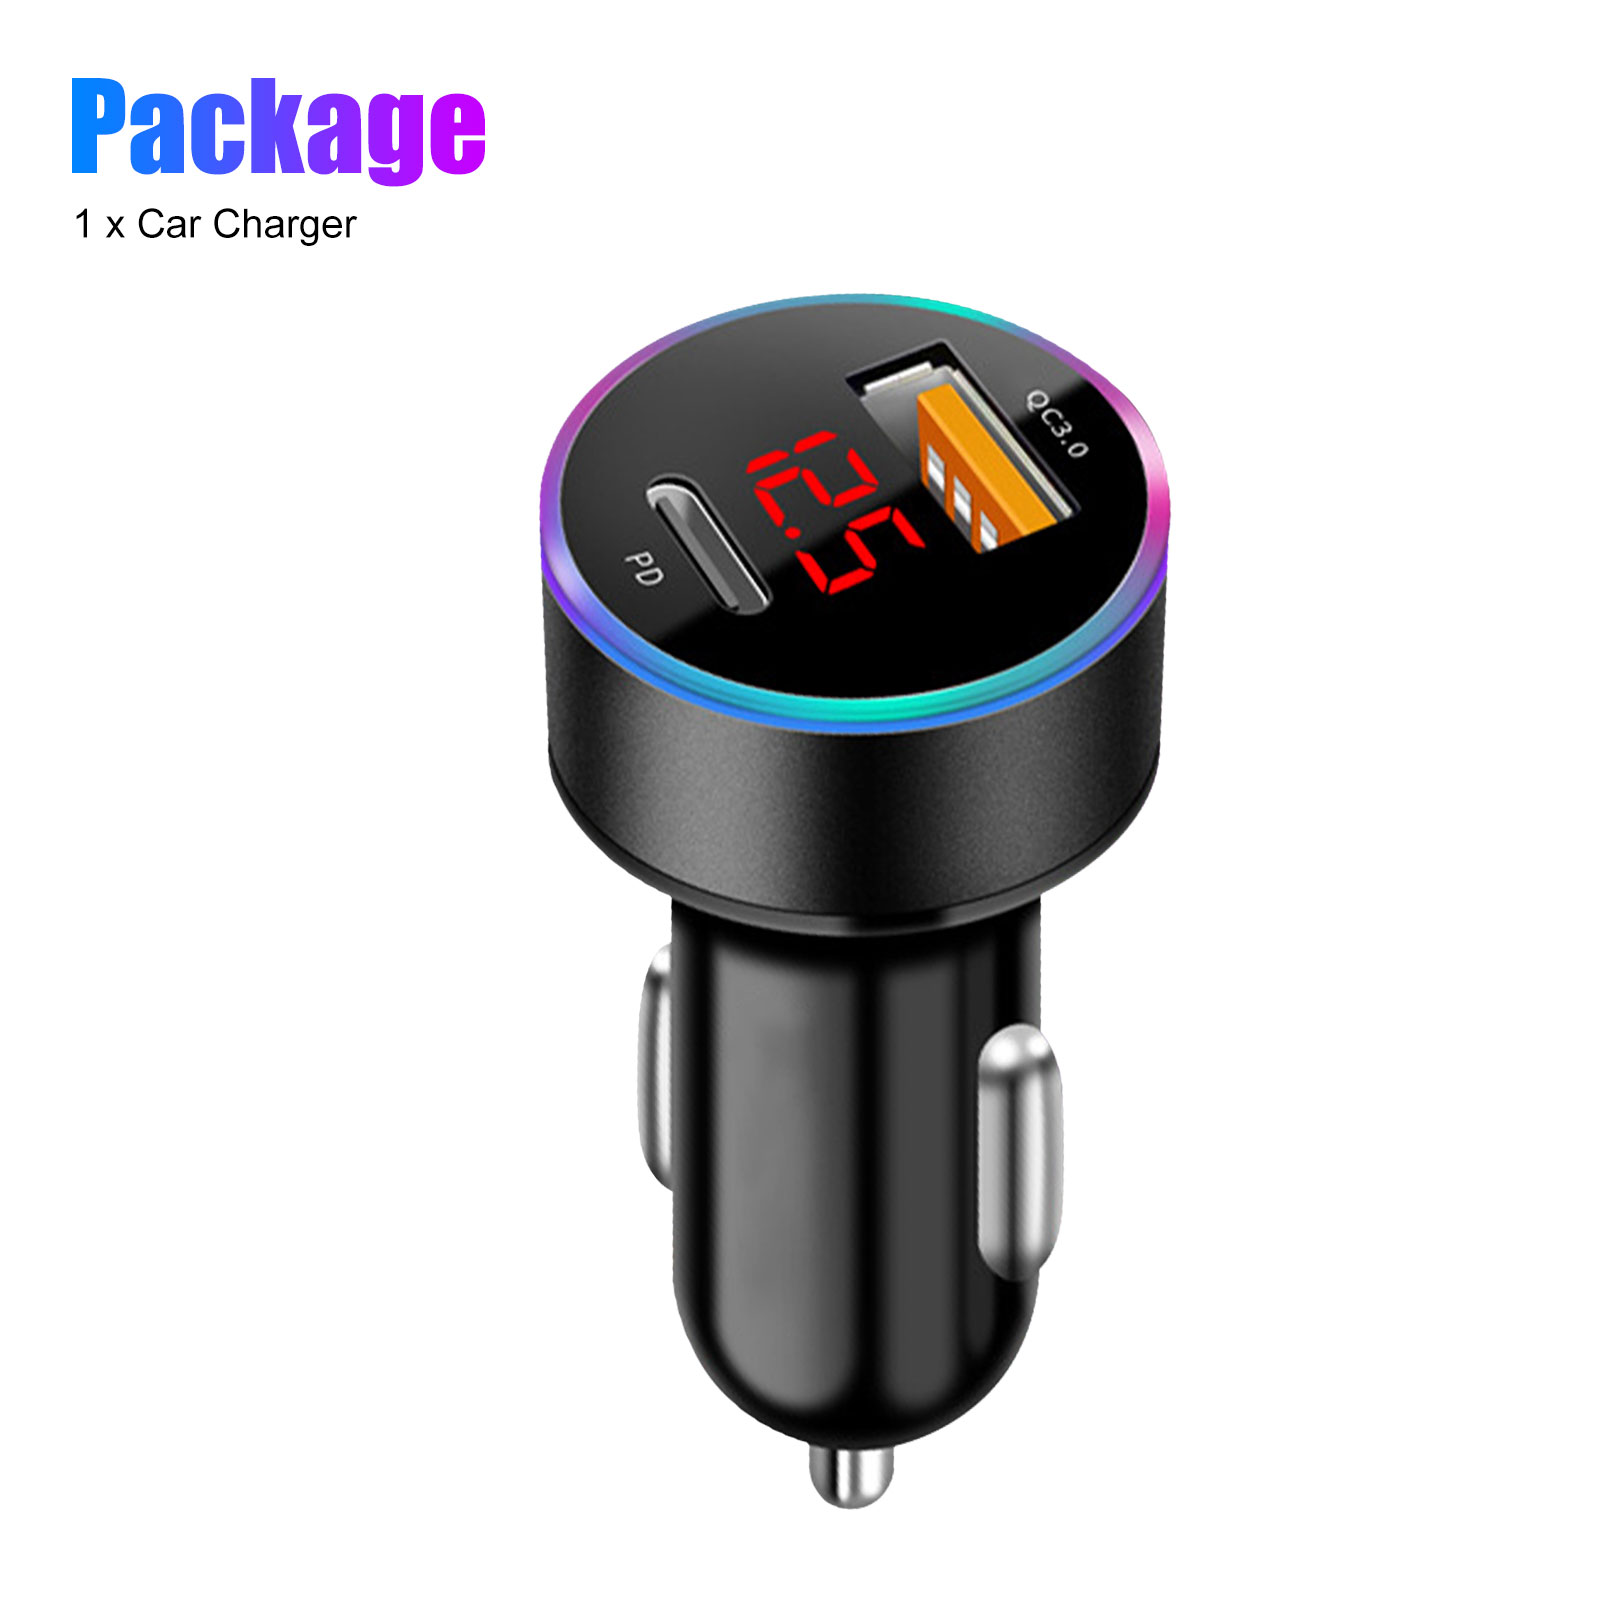 TSV USB C Car Charger, 36W Fast USB Car Charger PD QC 3.0 Dual Port Car Adapter, Mini Alloy USB Charger Compatible with iPhone 12, 12 Mini, 12 Pro, 12 Pro Max, 11 Pro Max, Pixel, Samsung - image 9 of 9